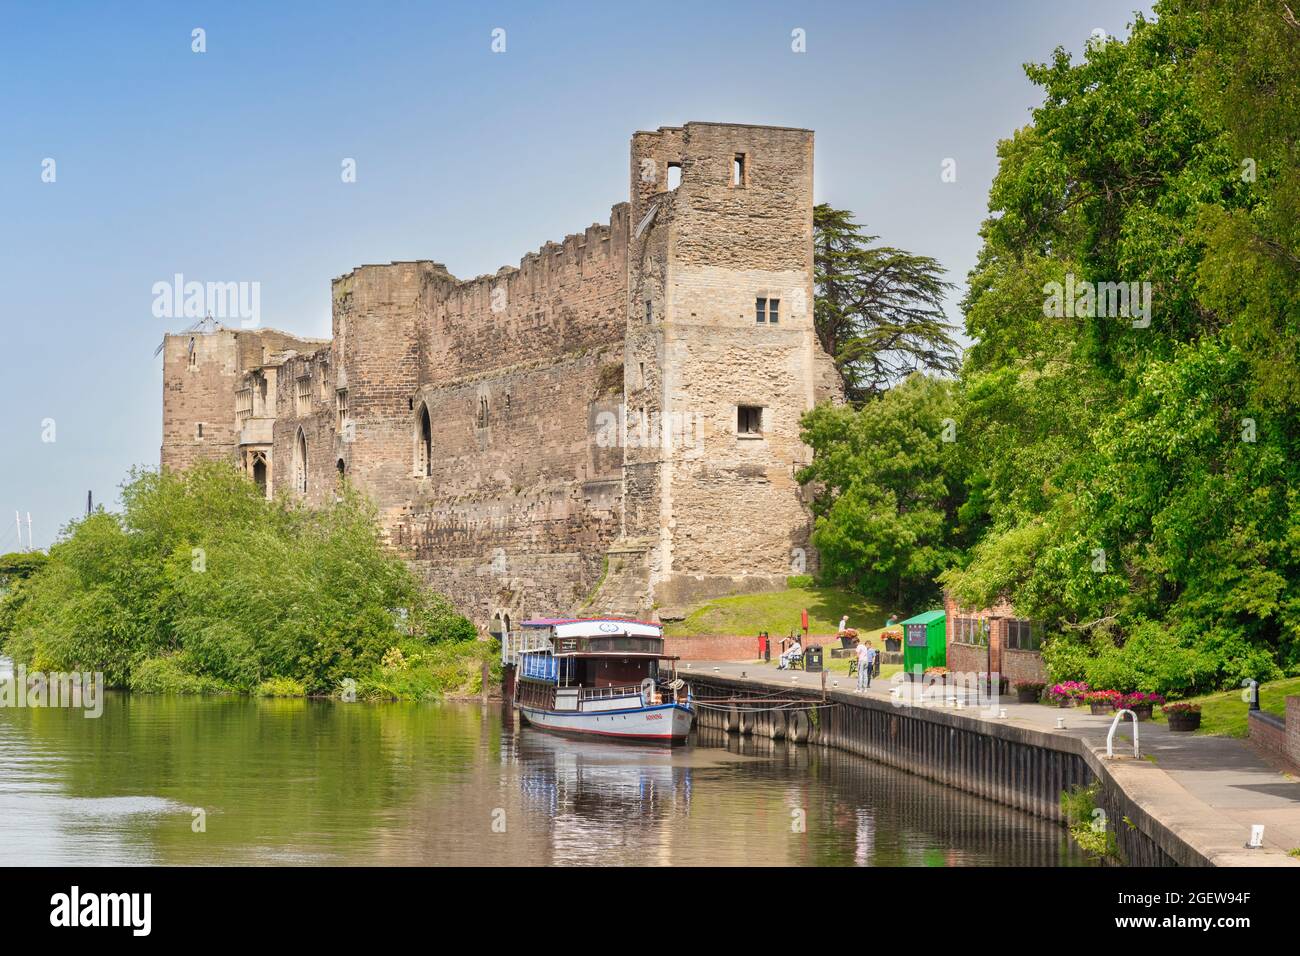 4 July 2019: Newark-on-Trent, Nottinghamshire, UK - Newark Castle and the River Trent in summer. Tour boat moored at the quay, people on path beside i Stock Photo